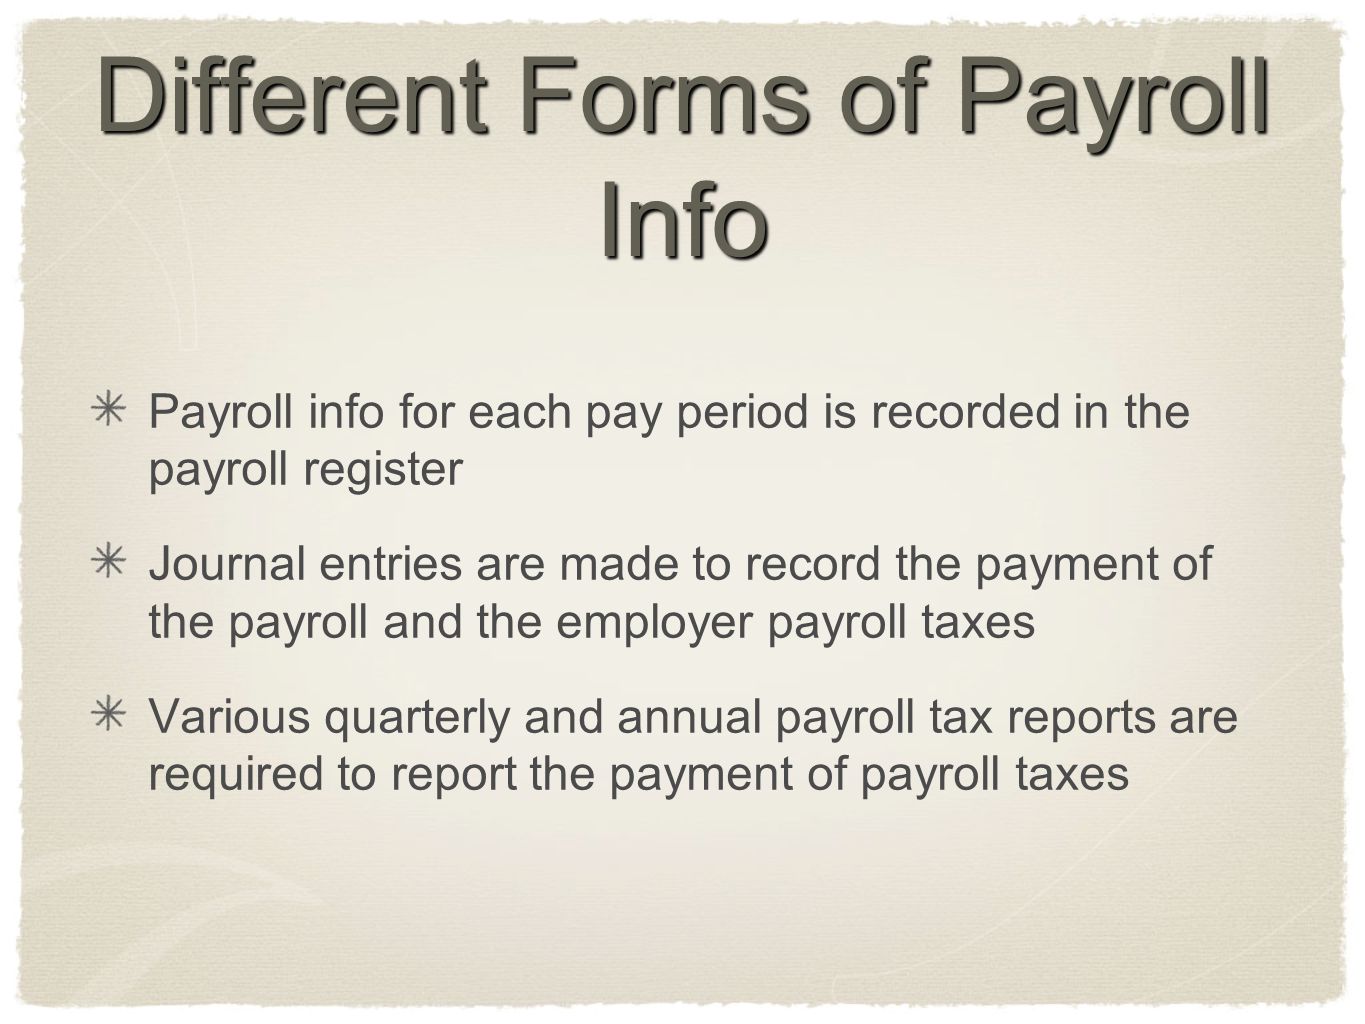 Different Forms of Payroll Info